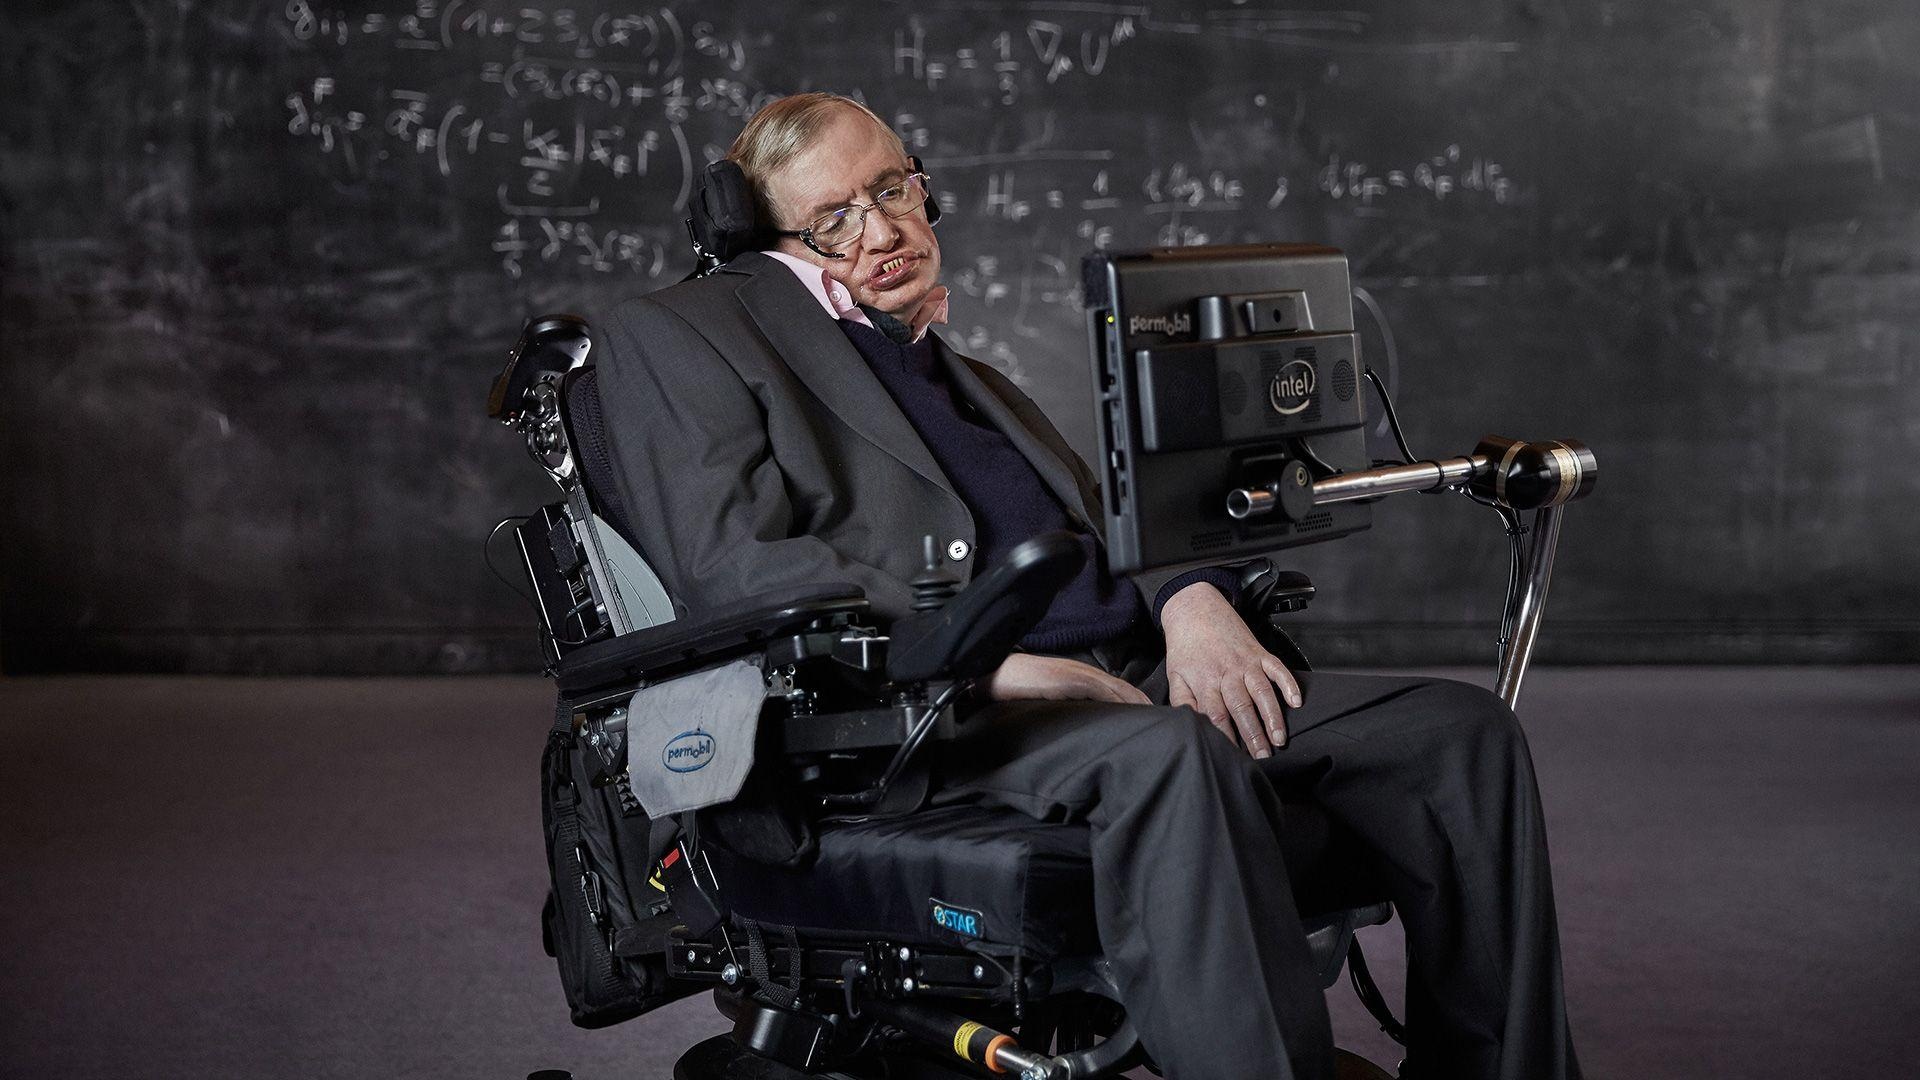 Stephen Hawking cool wallpapers, Science and knowledge, Inspiring quotes, Intellectual icon, 1920x1080 Full HD Desktop